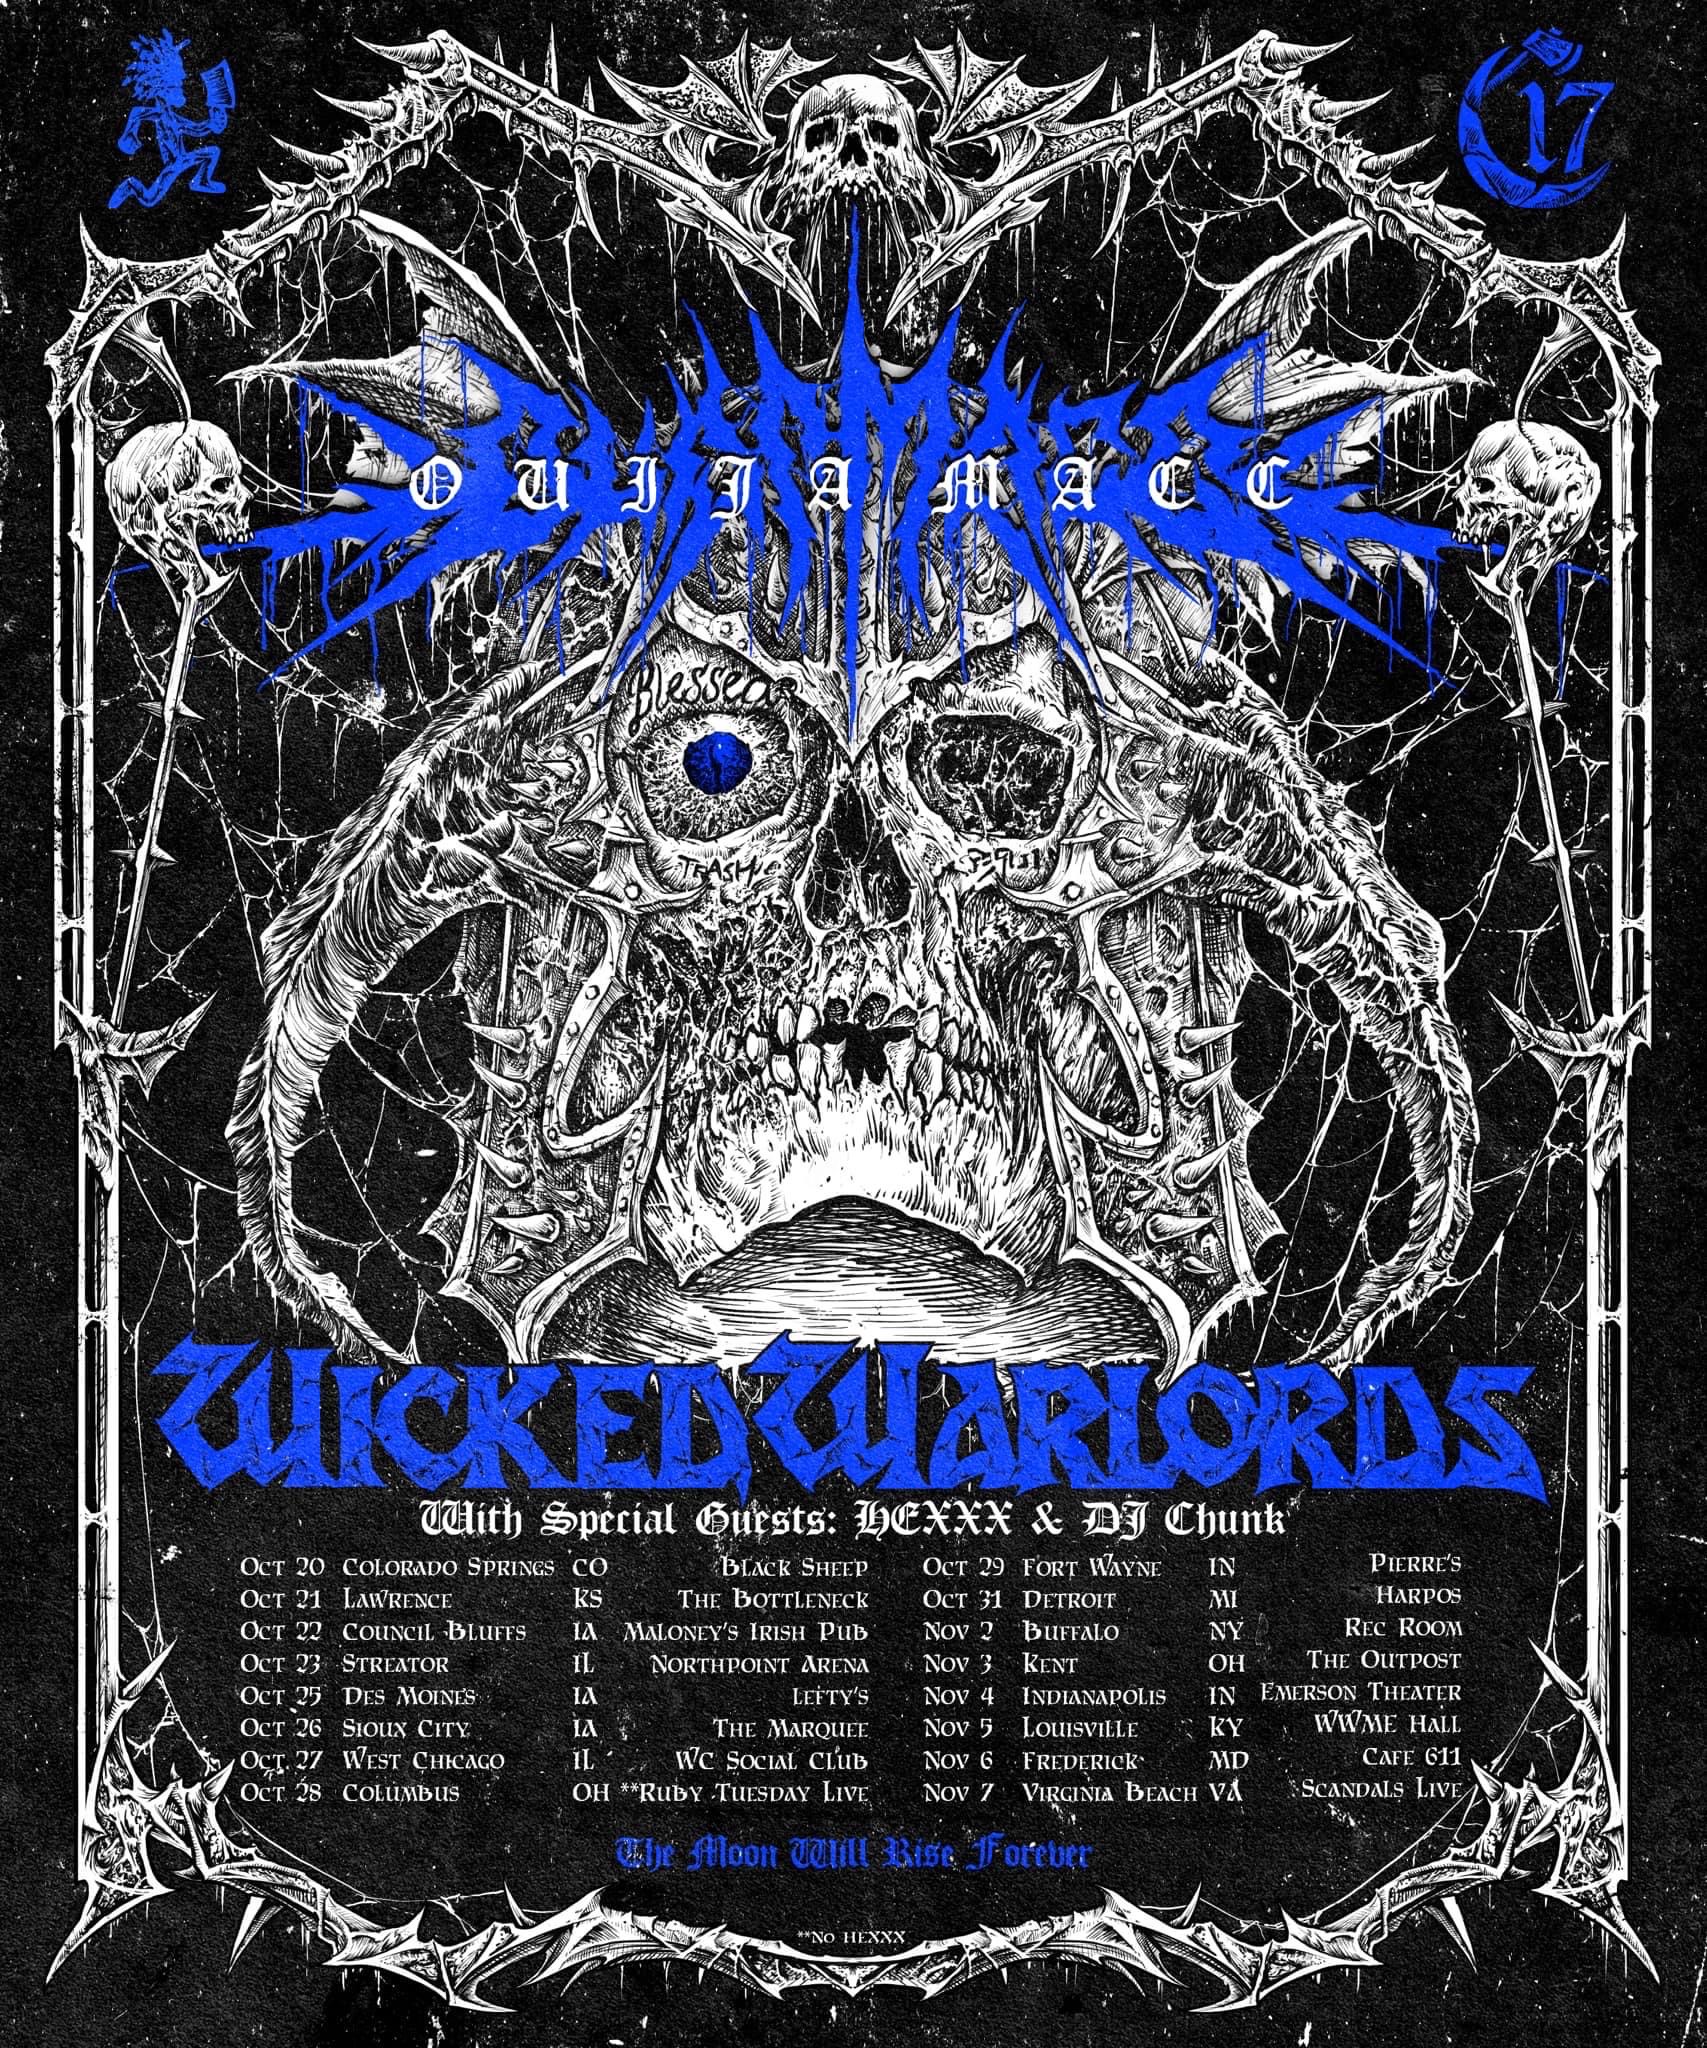 WICKED WARLORDS TOUR! Second Leg